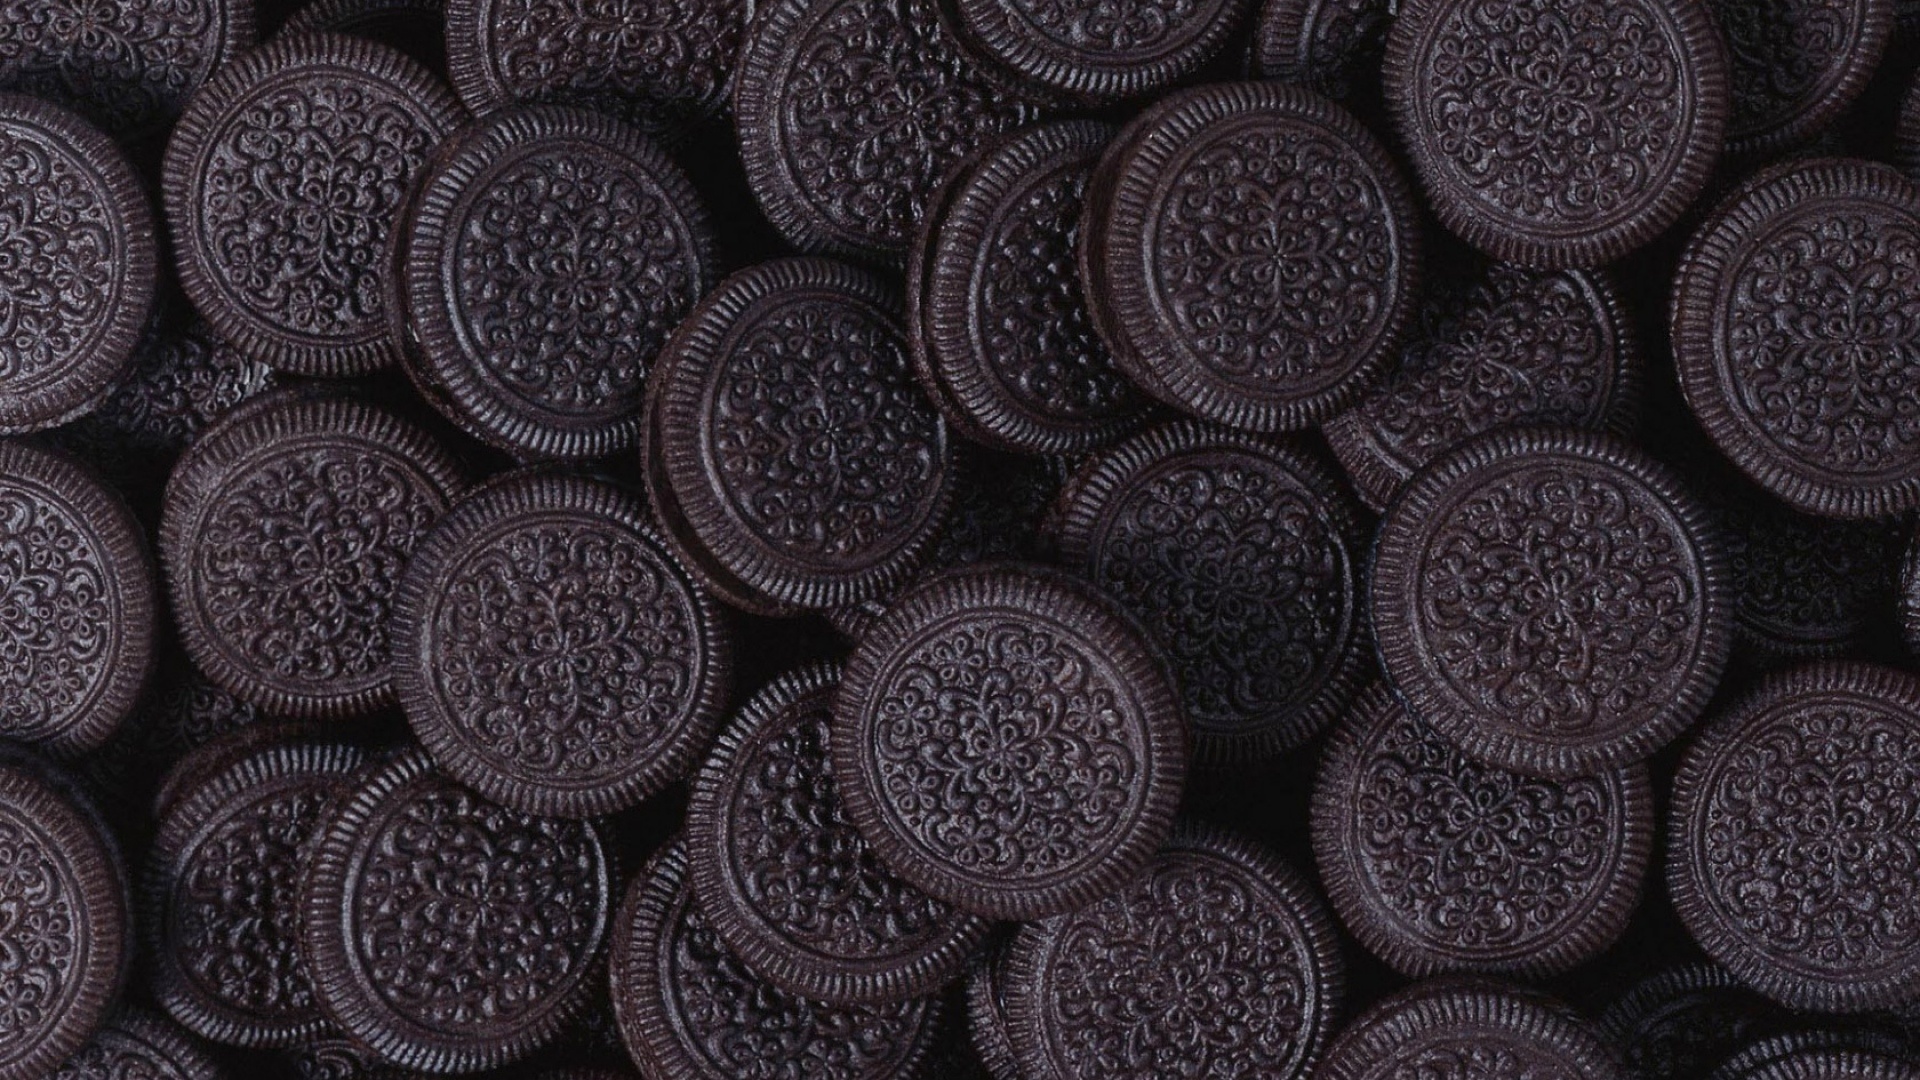 Oreo Cookies: The iconic sandwich cookie, Dessert, Staple food. 1920x1080 Full HD Background.